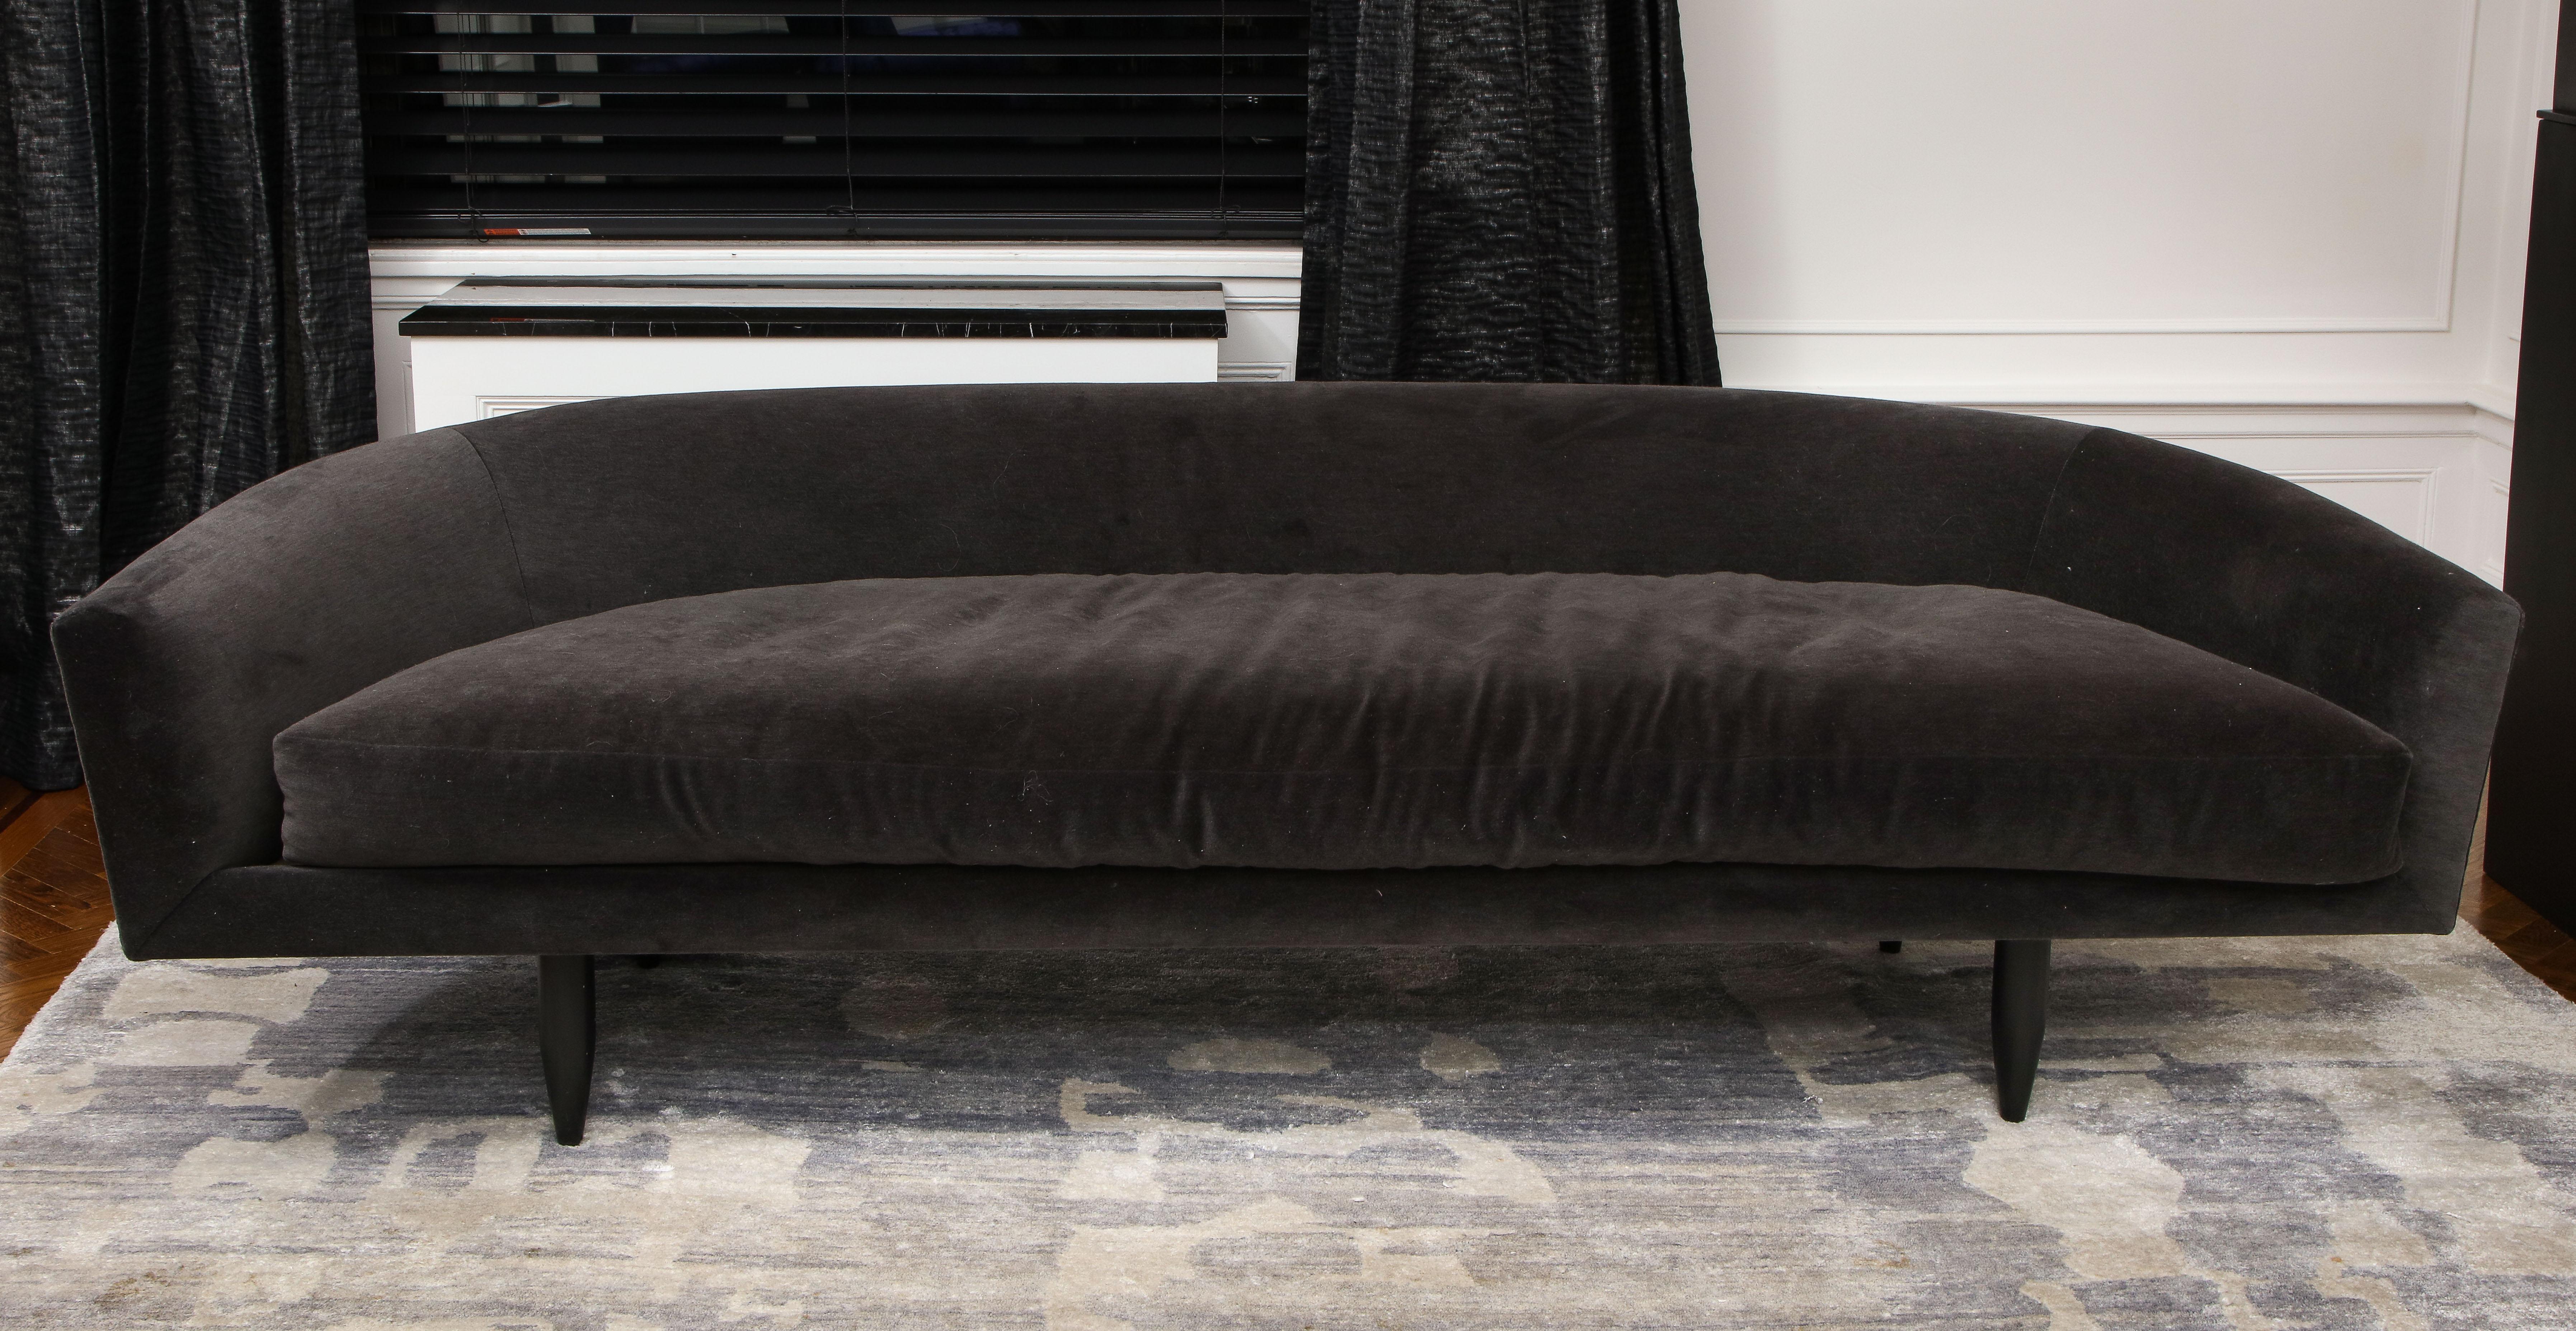 Custom Gondola sofa designed by Venfield. The price does not include the cost of fabric/COM (Customer-Owned-Material). 12 yards of fabric are required to make the size listed. Custom options are available for different sizes and finishes.